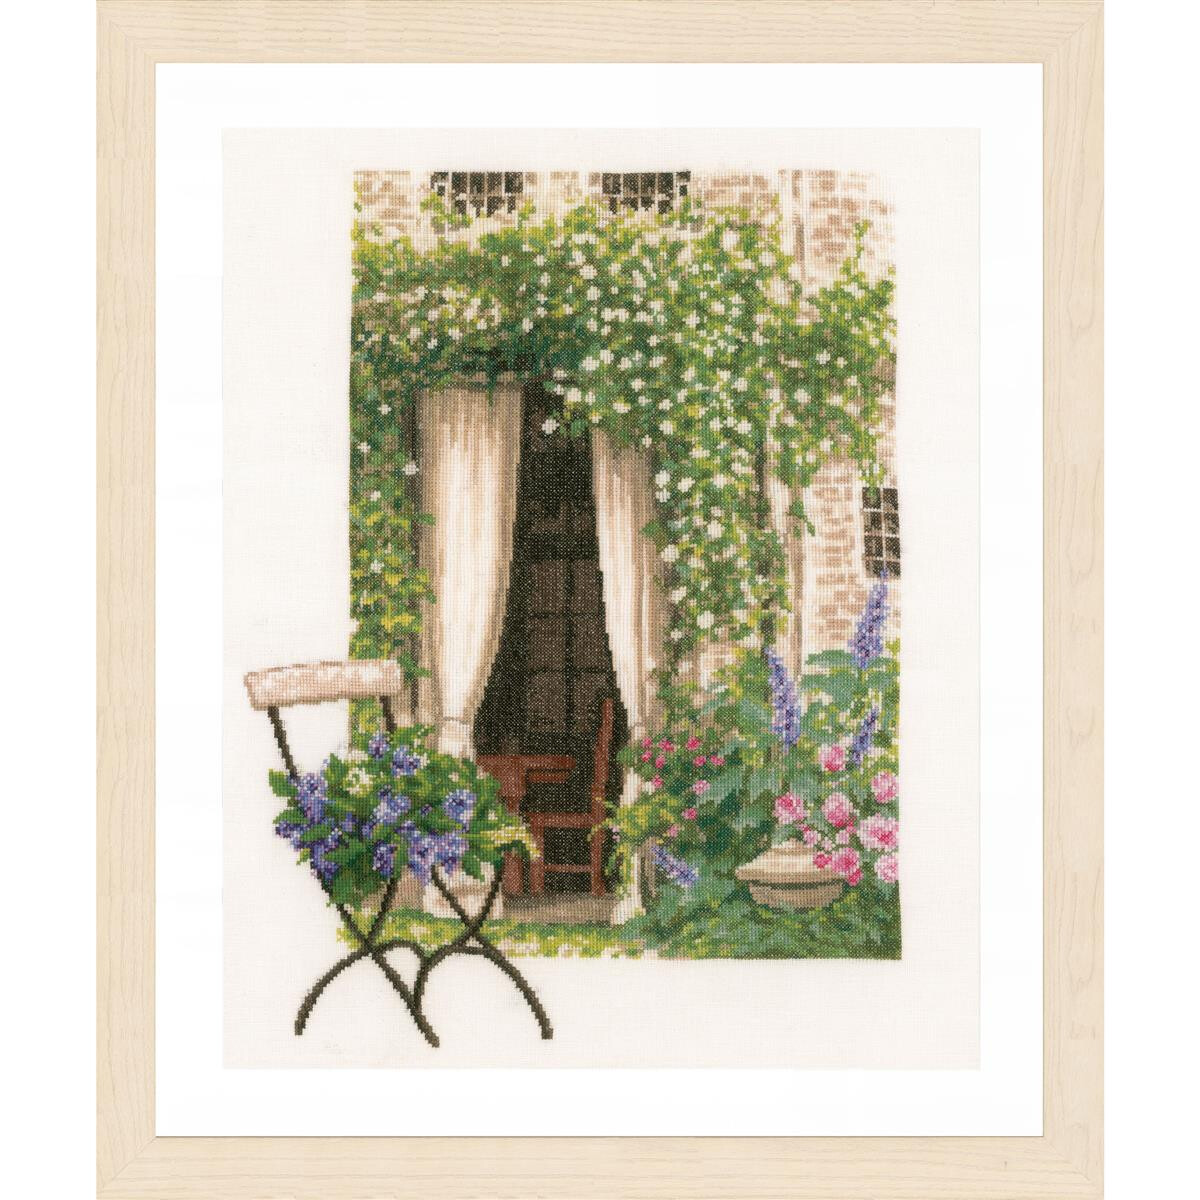 An embroidered picture made with Lanarte embroidery pack...